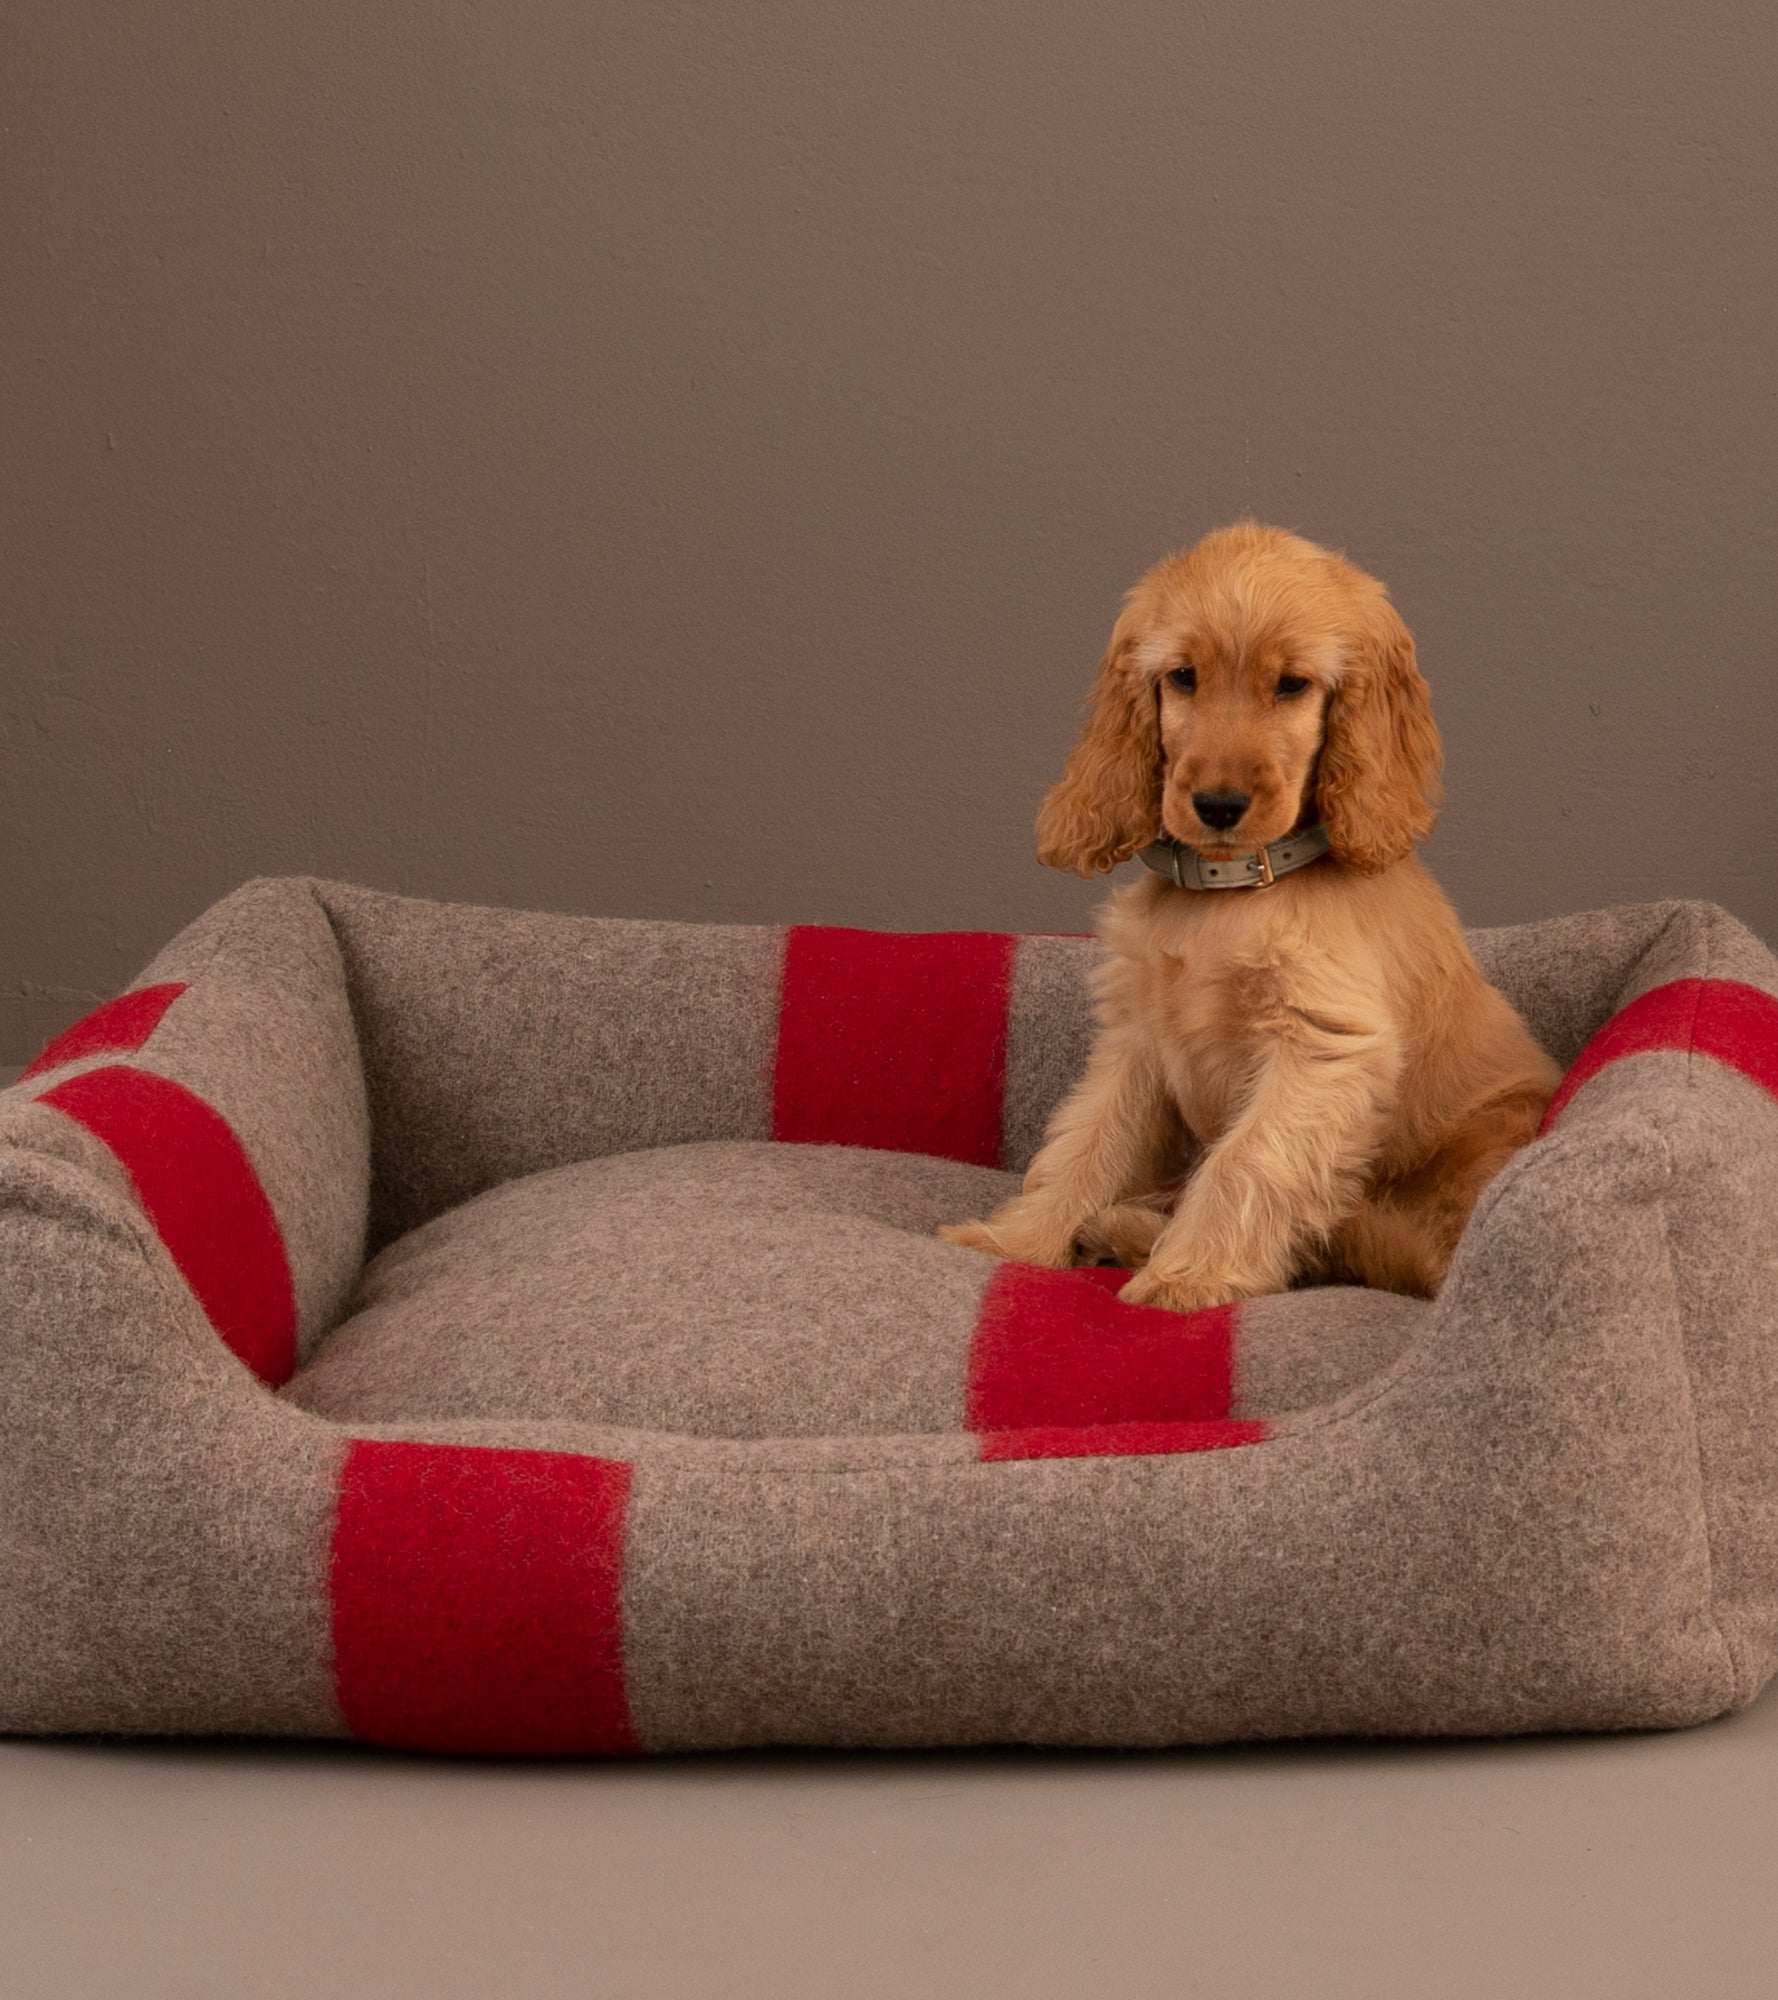 luxury-dog-bed-recycled-wool_3e547a2f-e9cc-49fe-abc8-4d40dad749ee.jpg